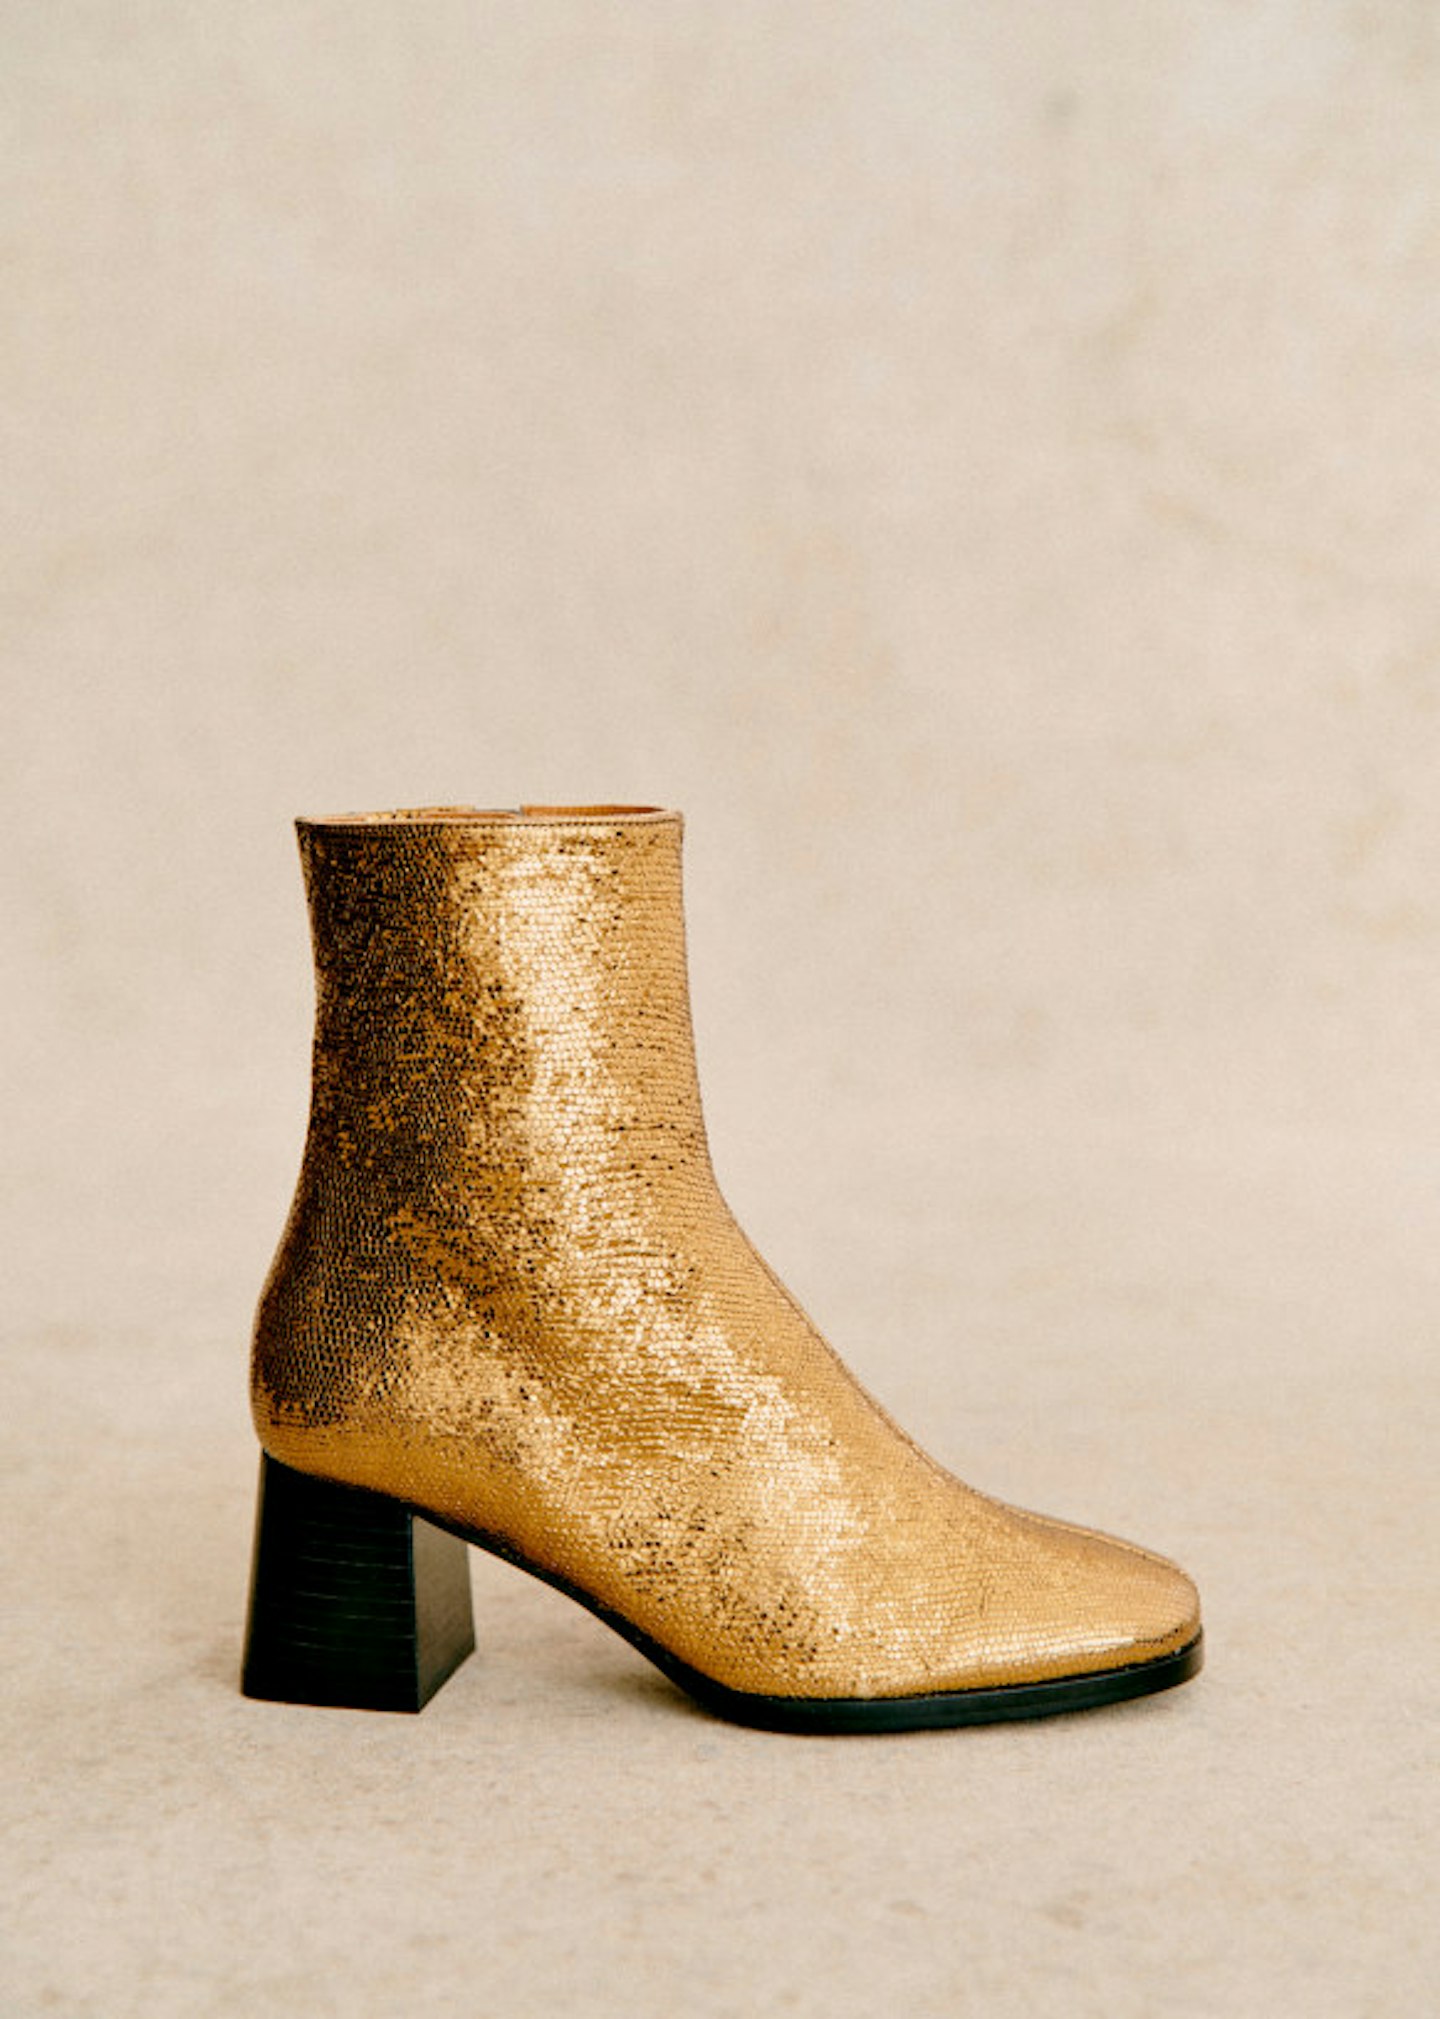 Sezane, Aexelle Ankle Boots